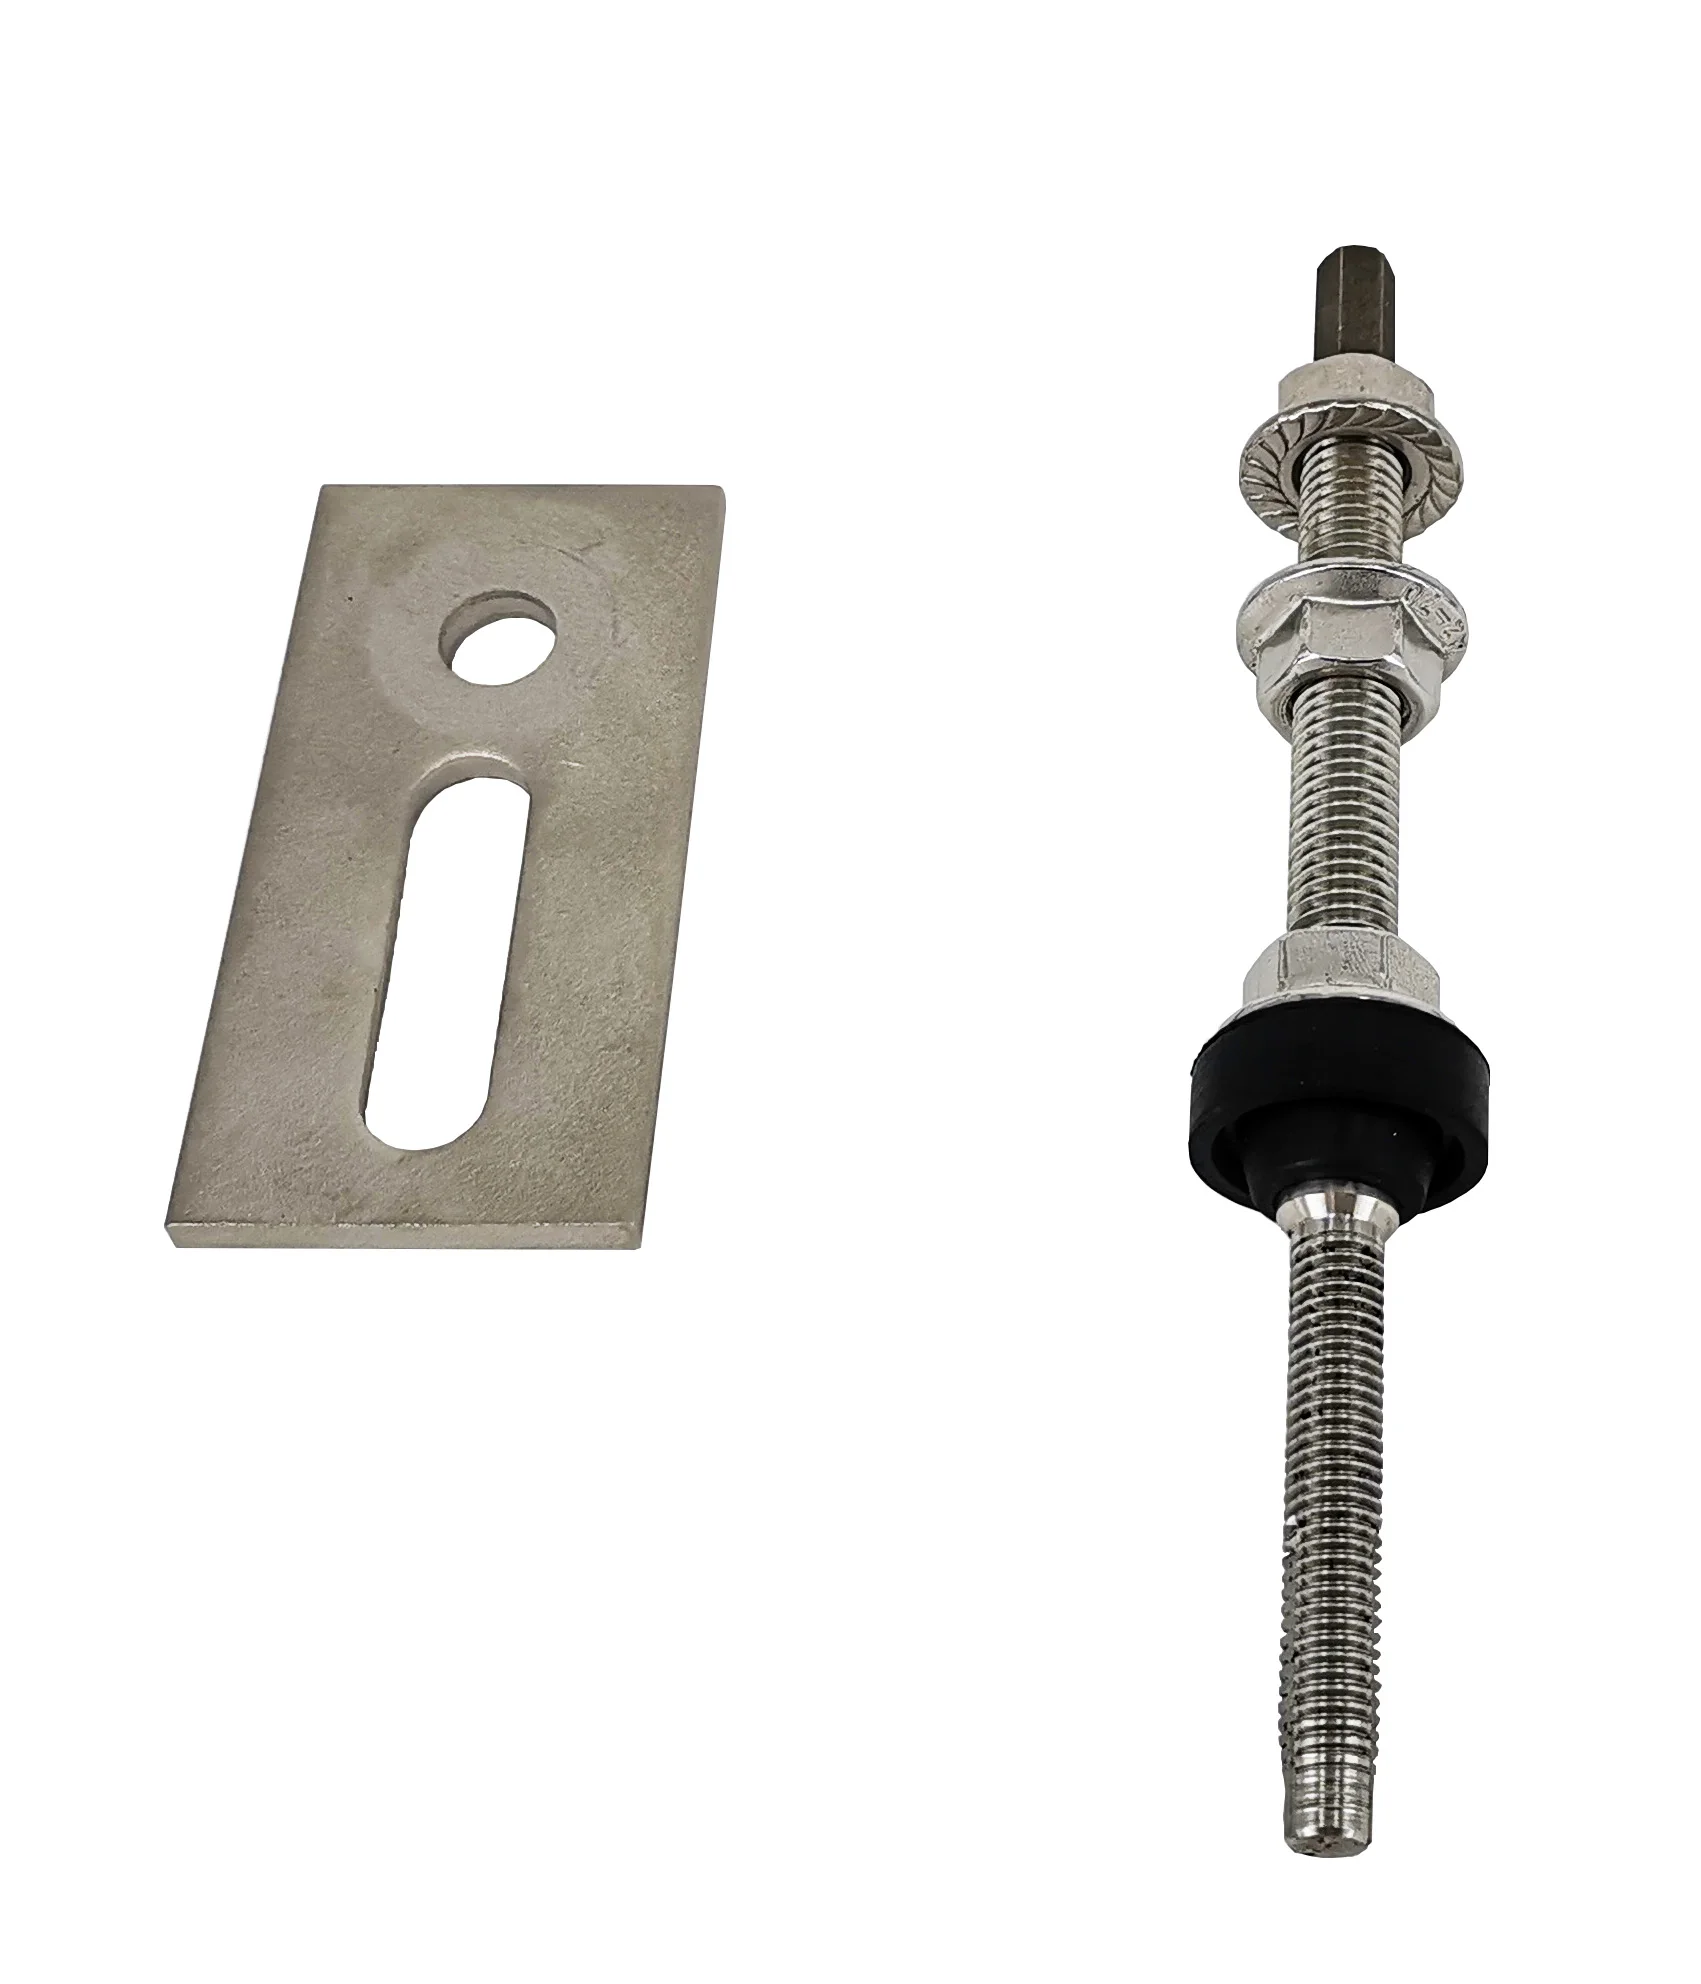 Stainless Steel hanger bolt for the deep steel beam of roof solar mounting system